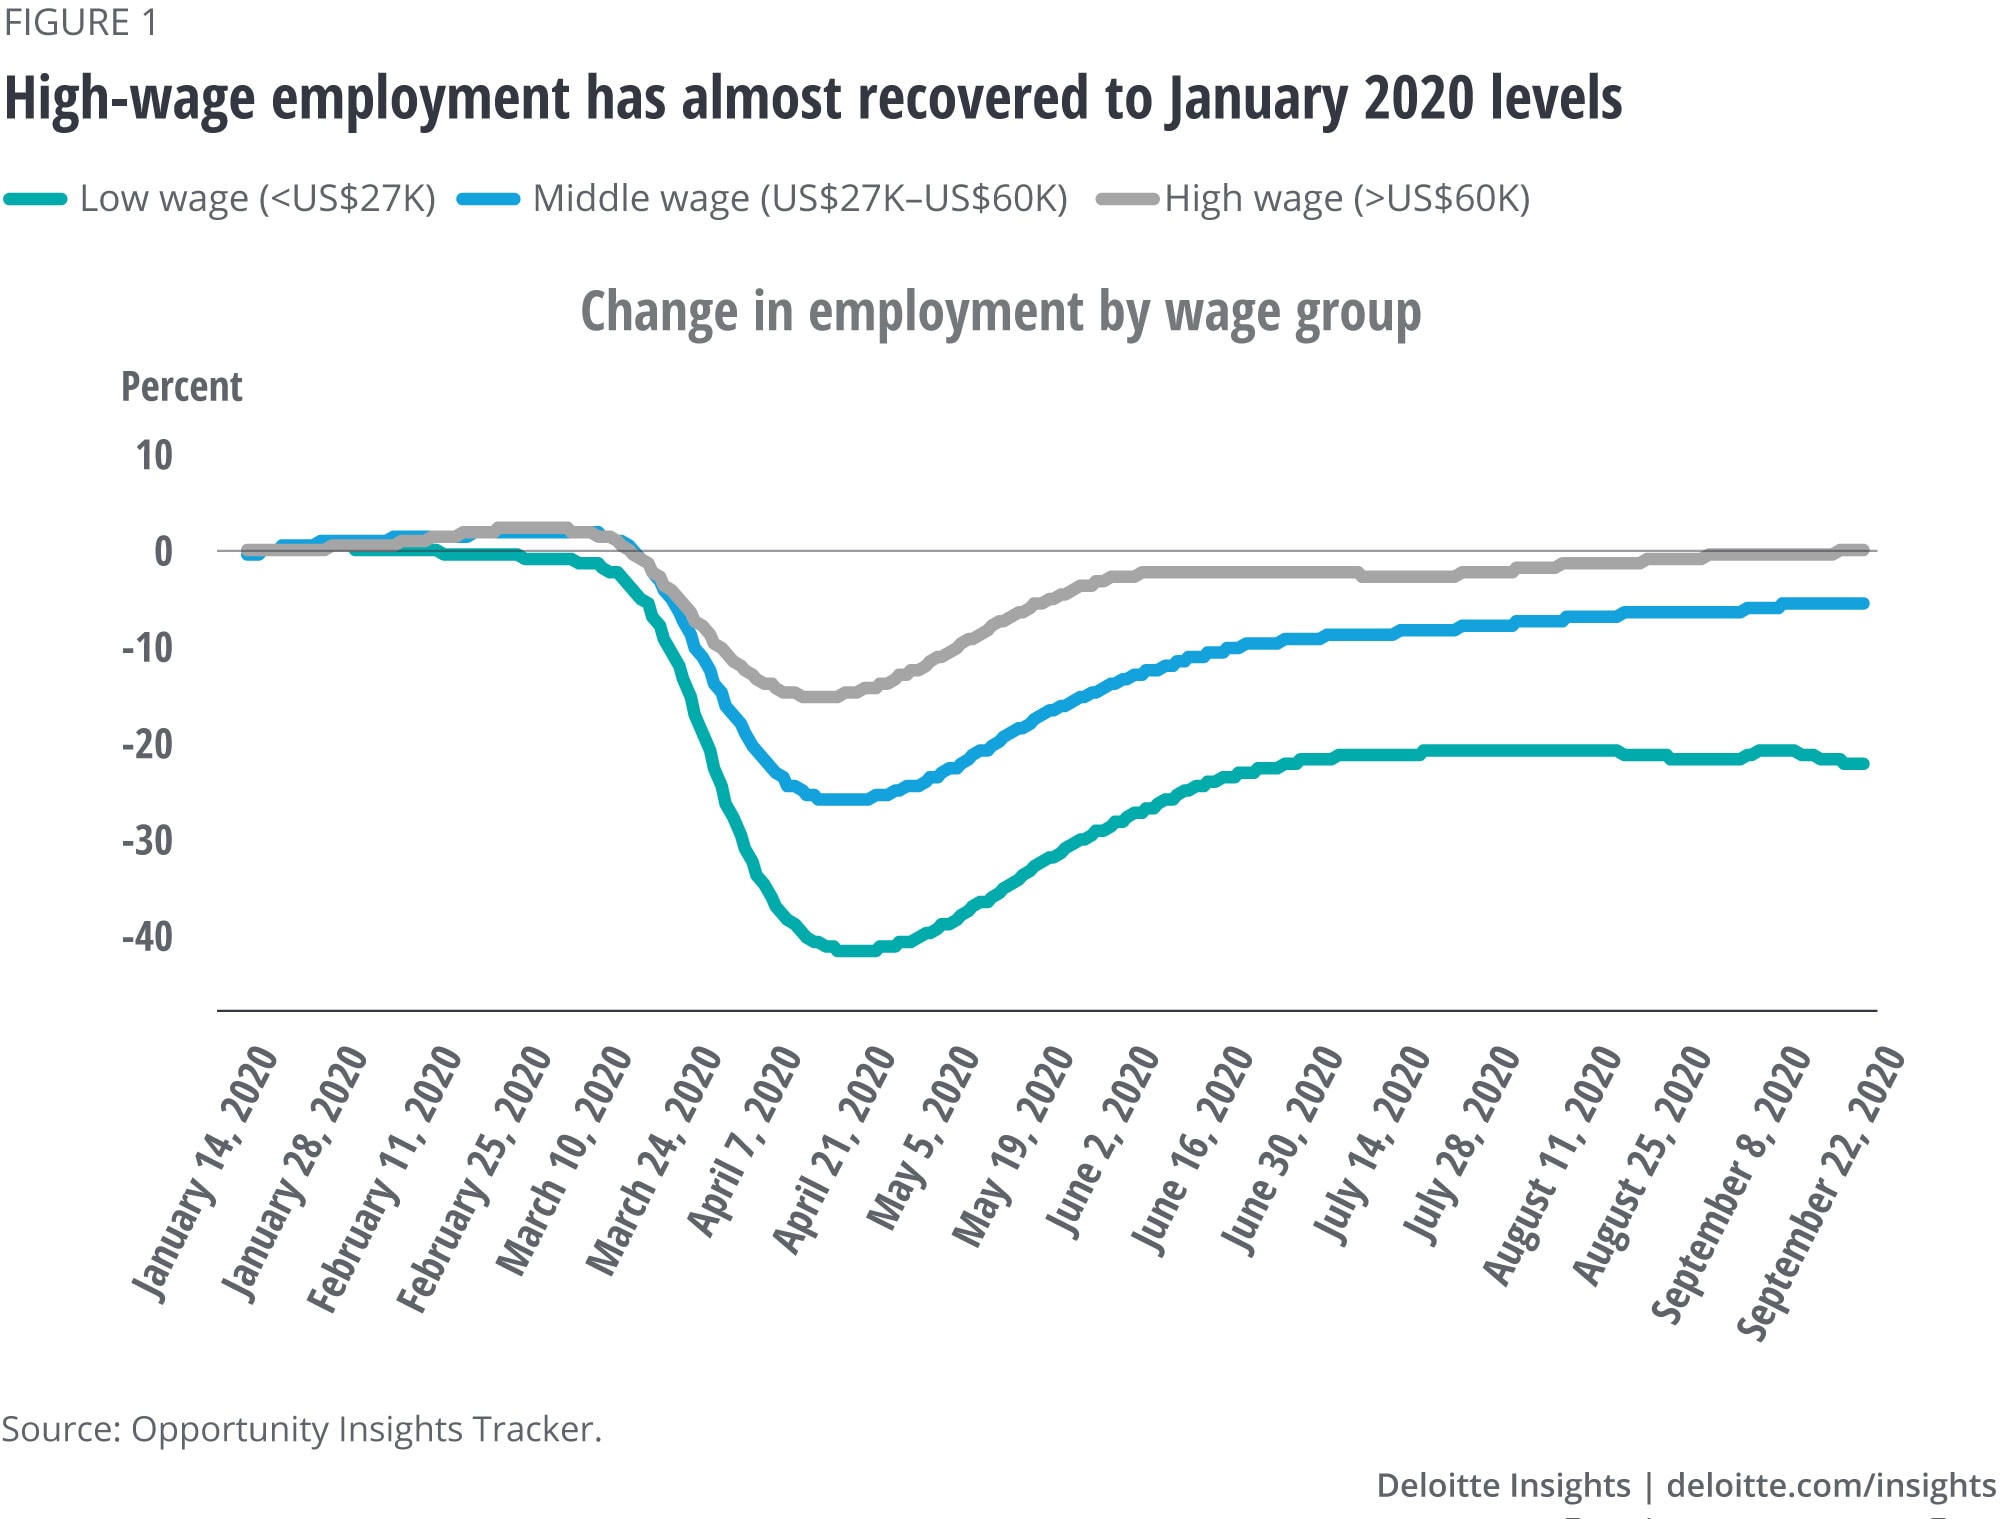 High-wage employment has almost recovered to January 2020 levels